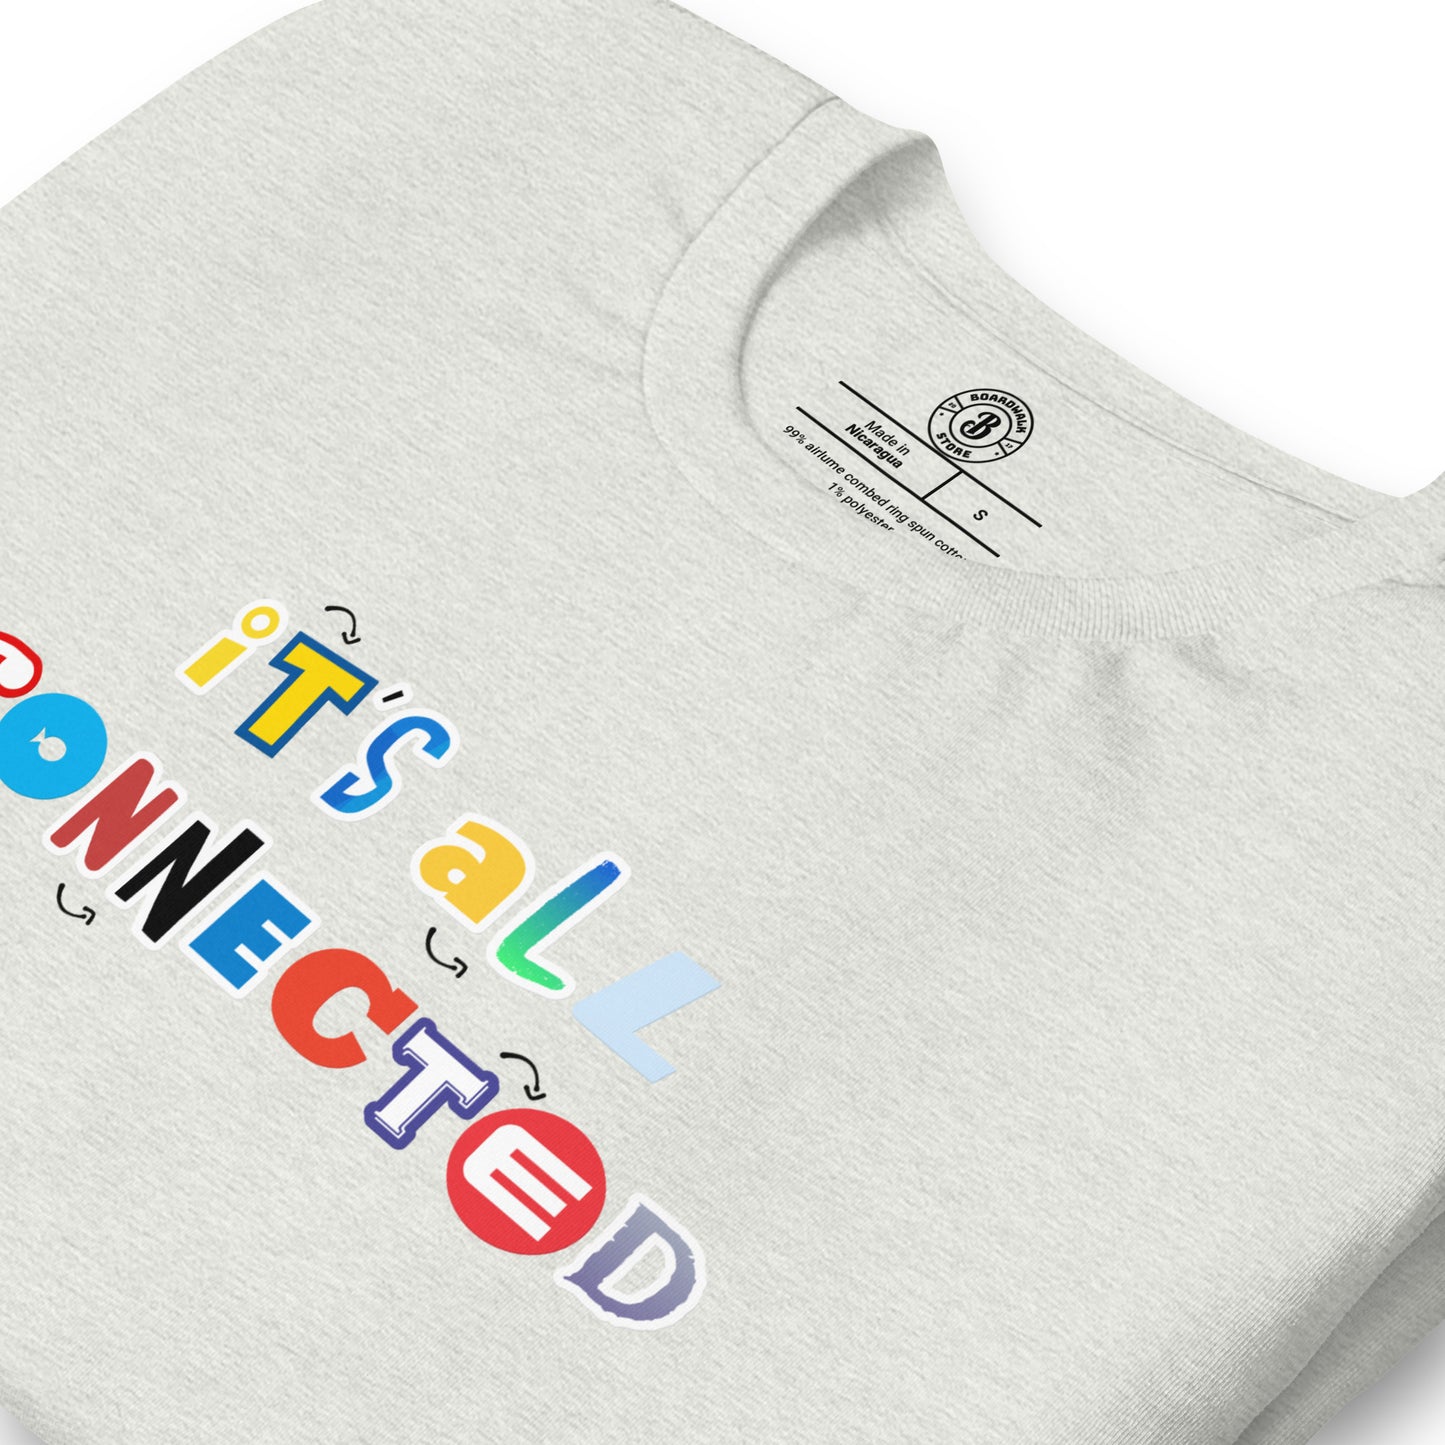 It's All Connected Tee